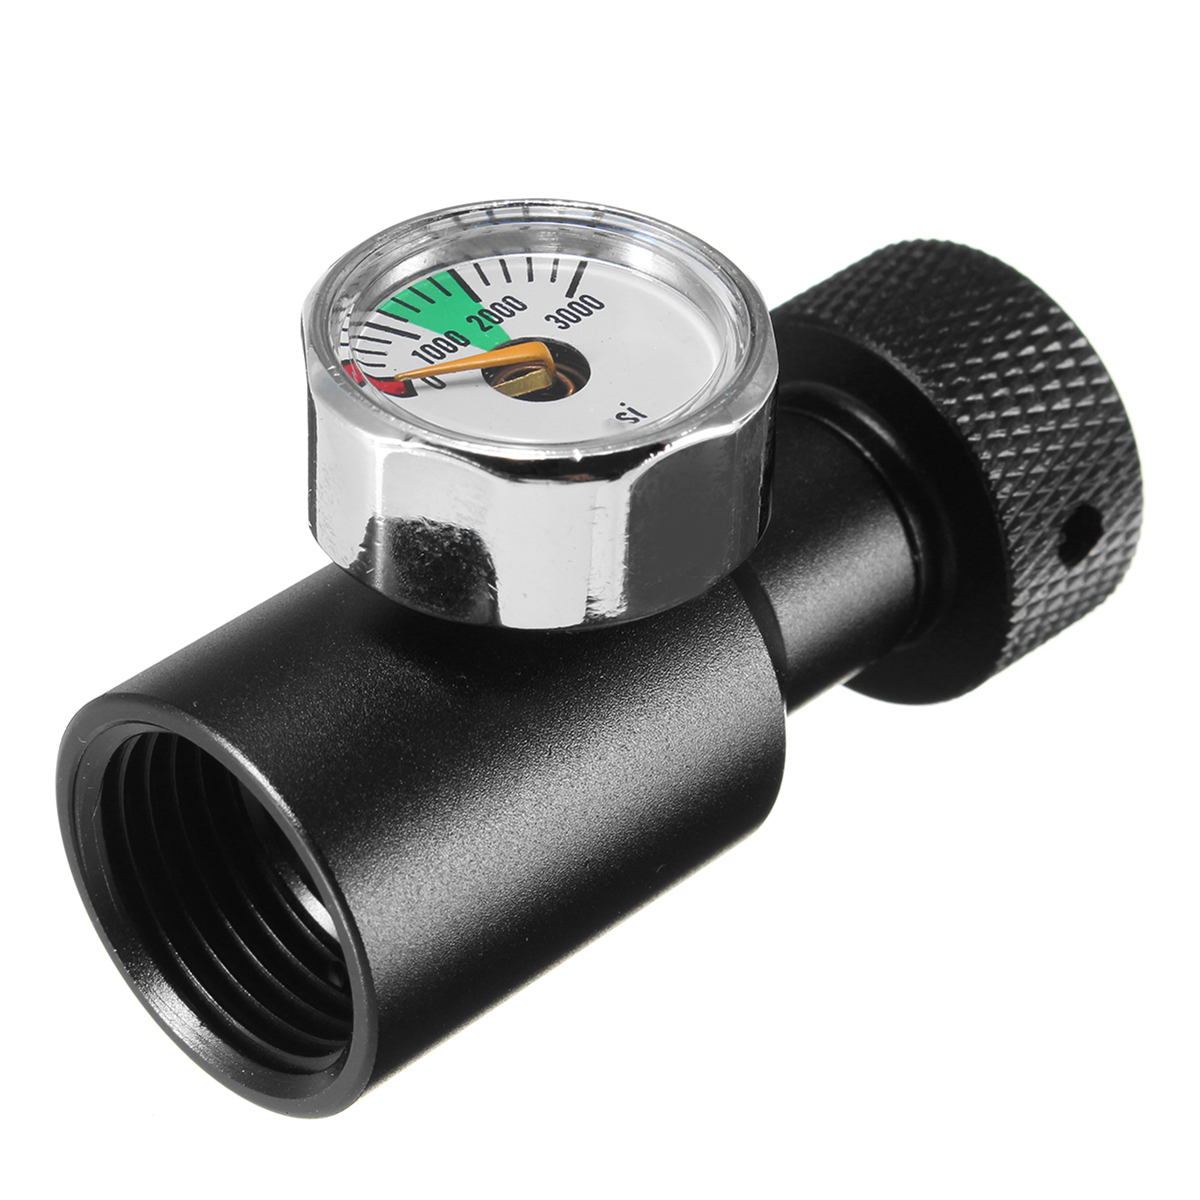 Paintball-CO2-Adapter-Air-Regulator-Fill-Station-Remote-On-Off-3000psi-Gauge-1303764